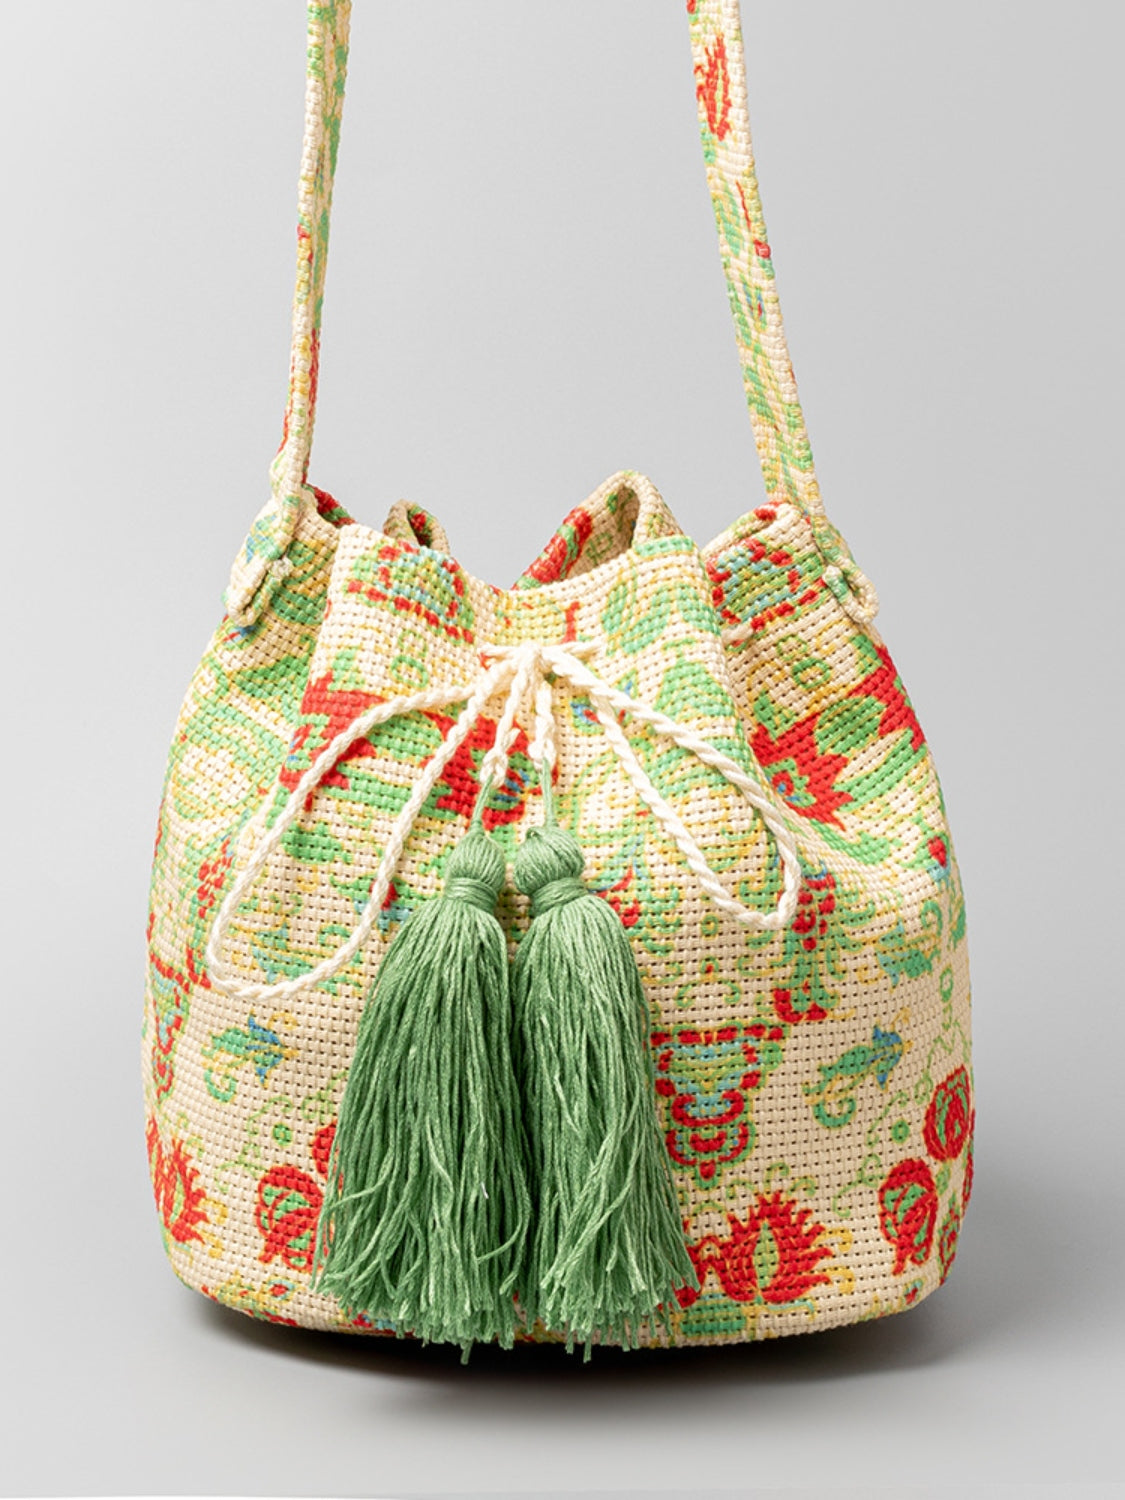 Green and red floral bucket bag with green tassel accents.